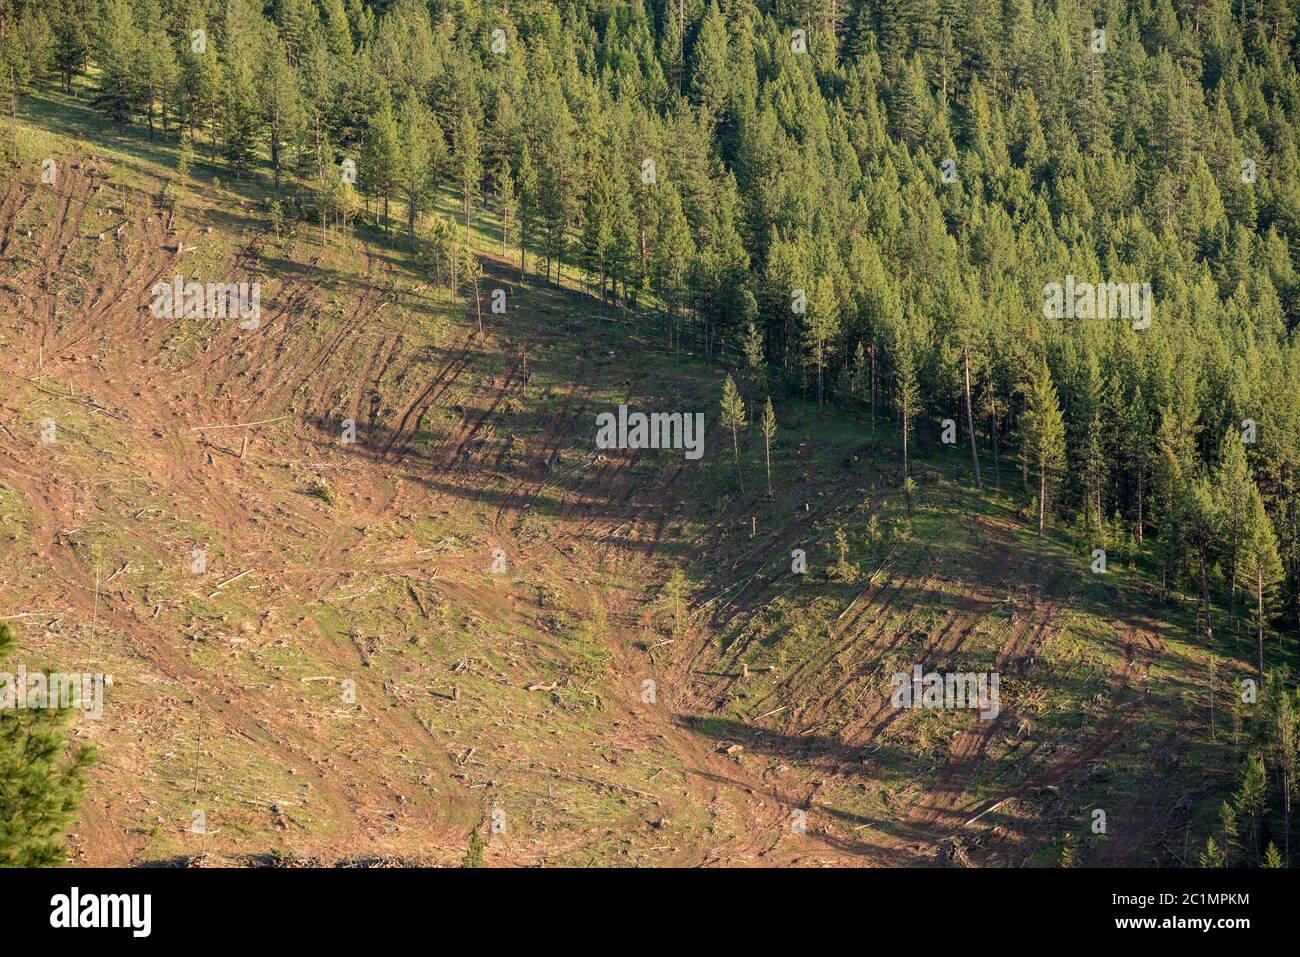 Logged forest on Hancock Timber Resource Group land in Wallowa County, Oregon. Stock Photo